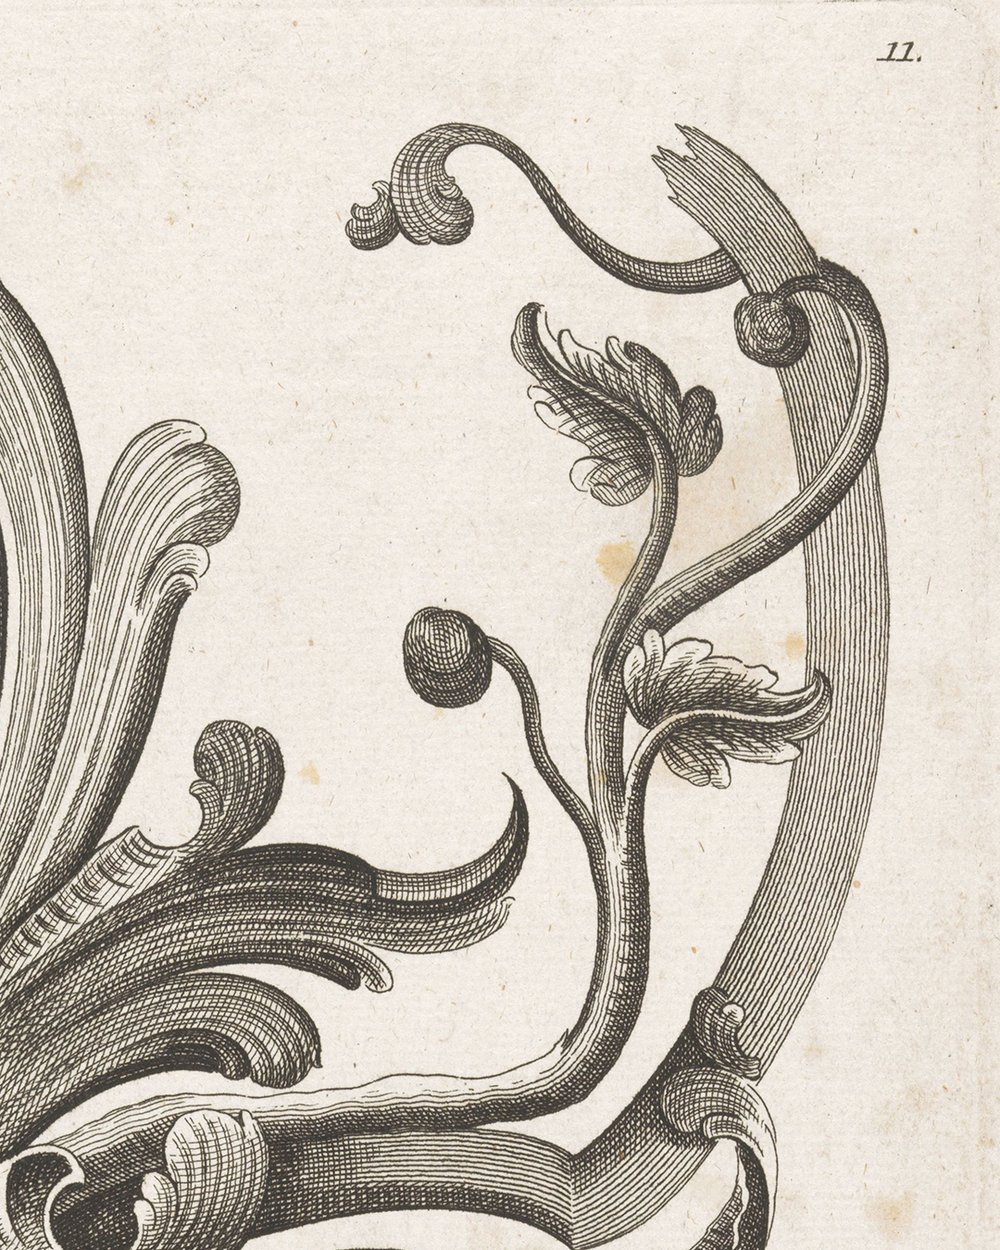 ''Wrought ironwork with floral motifs'' (1694 - 1756)